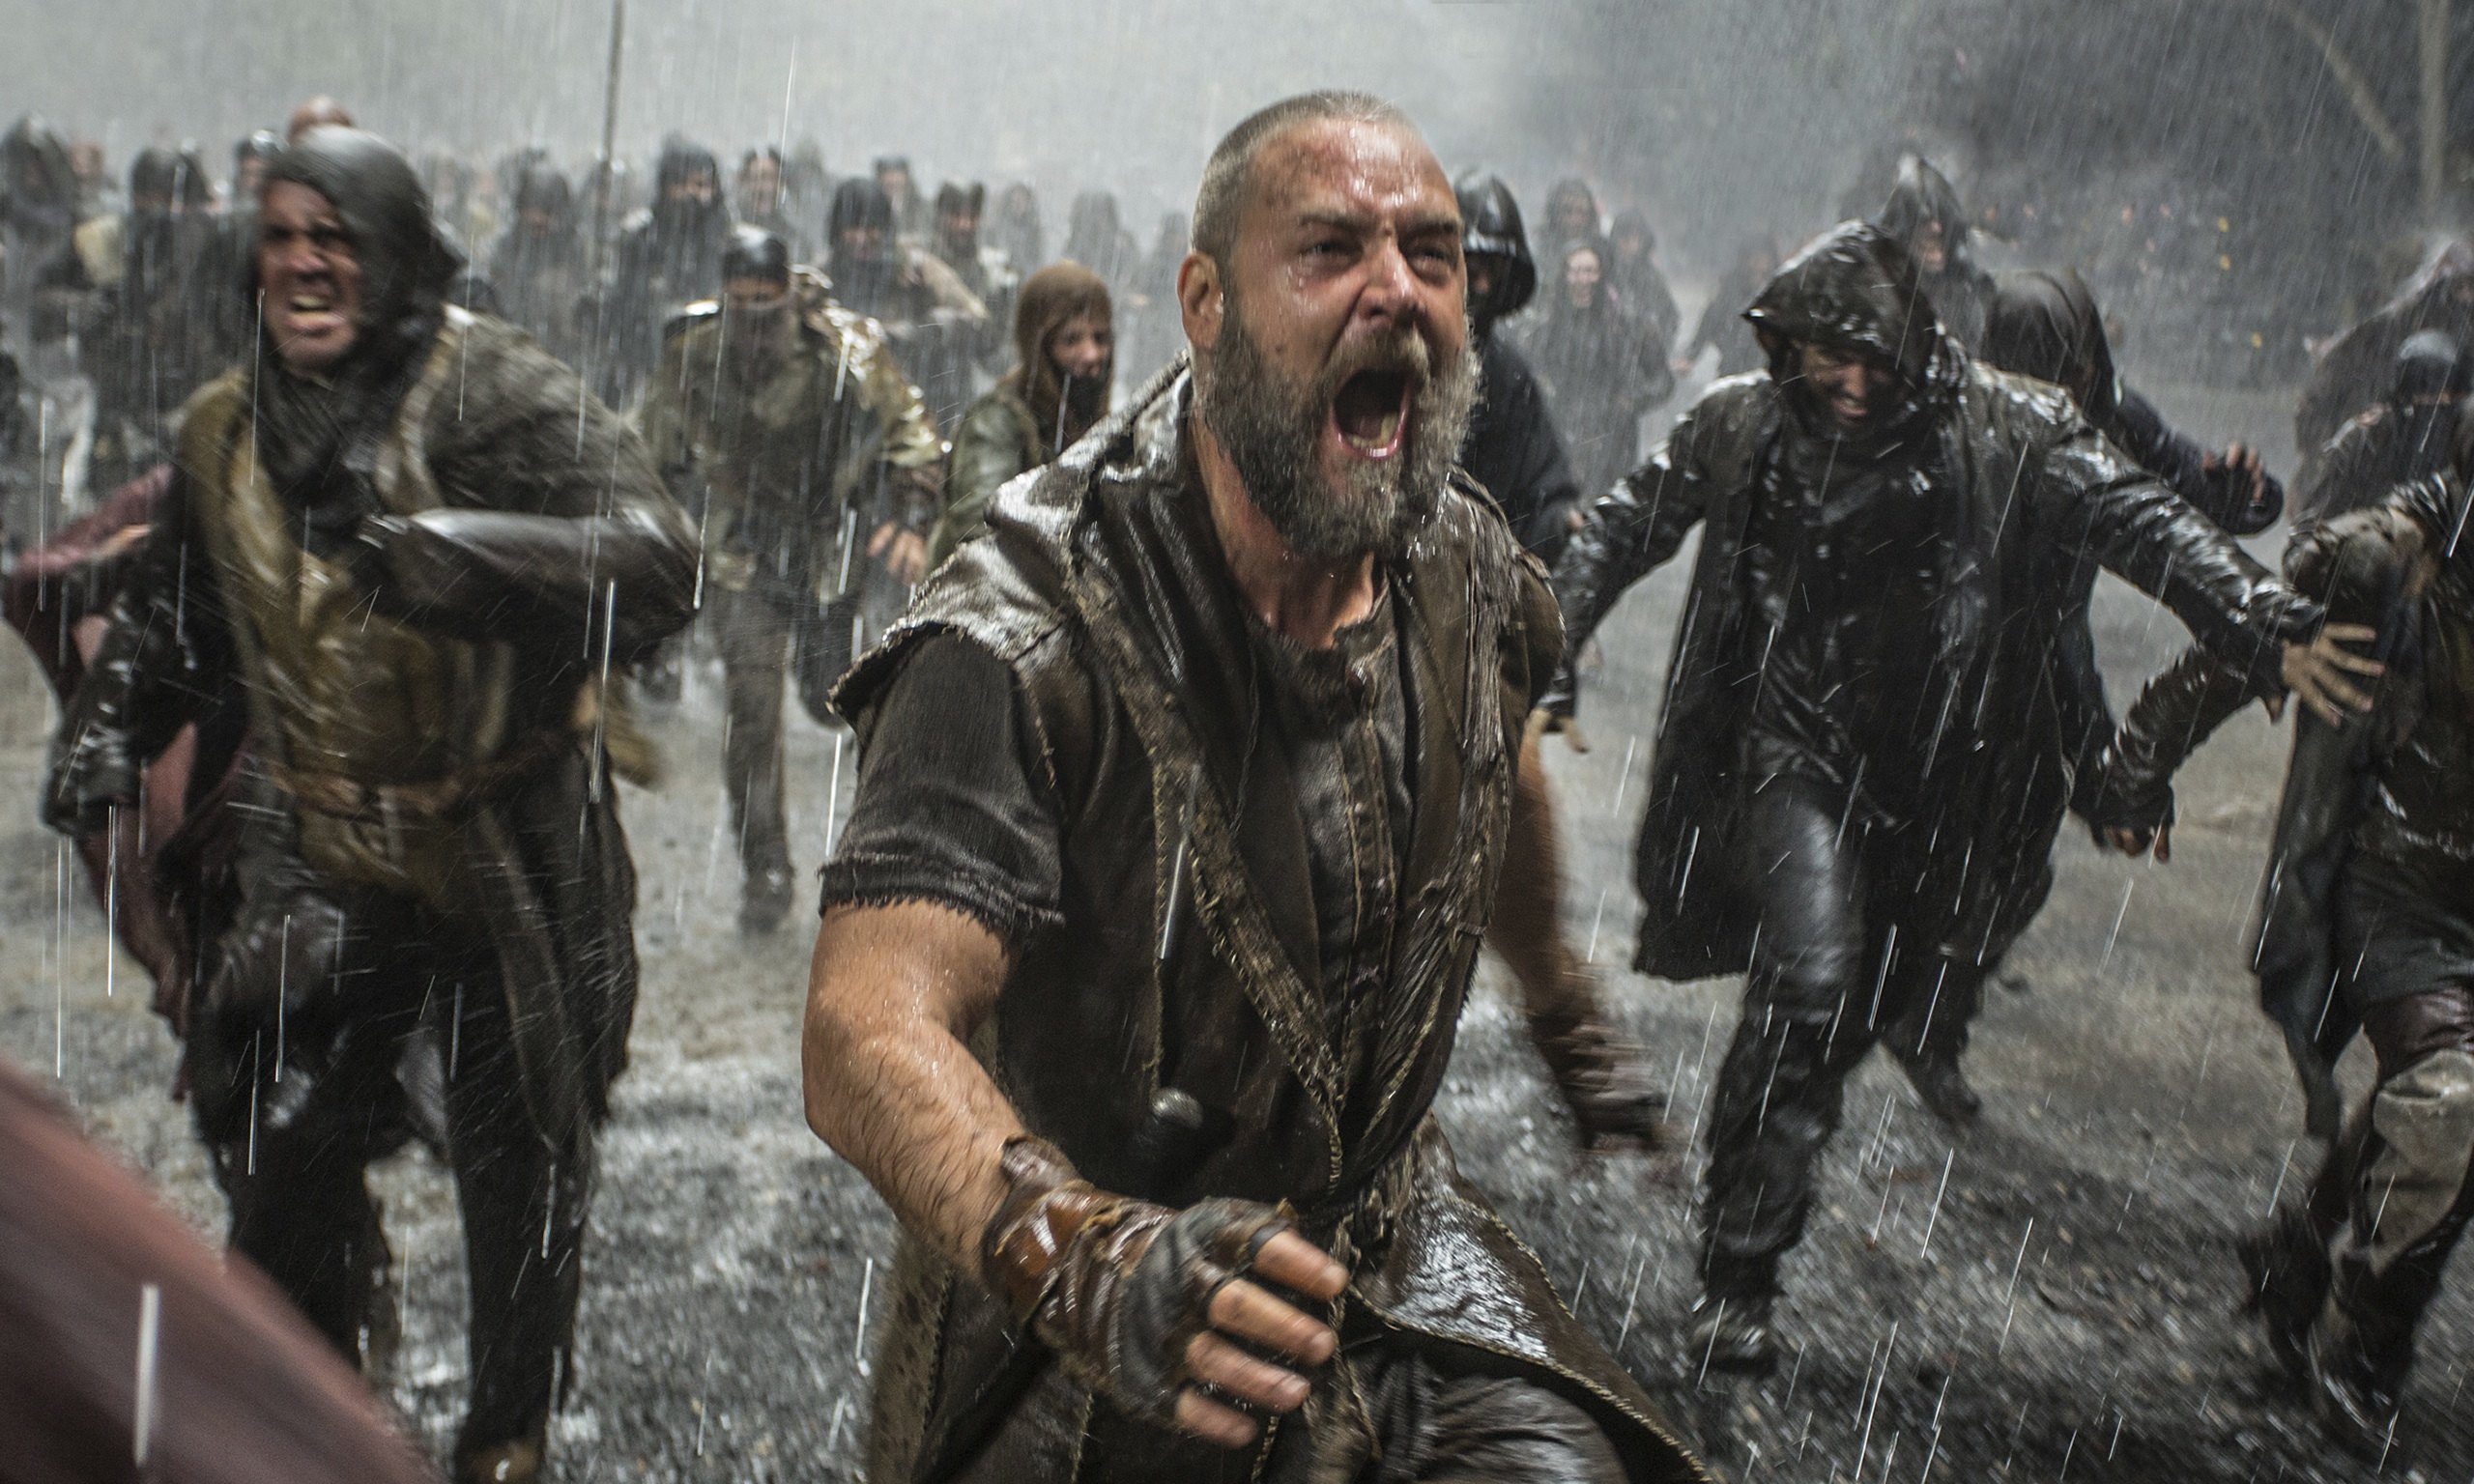 russell-crowe-as-noah-014-noah-s-russell-crowe-says-that-banning-was-to-be-expected